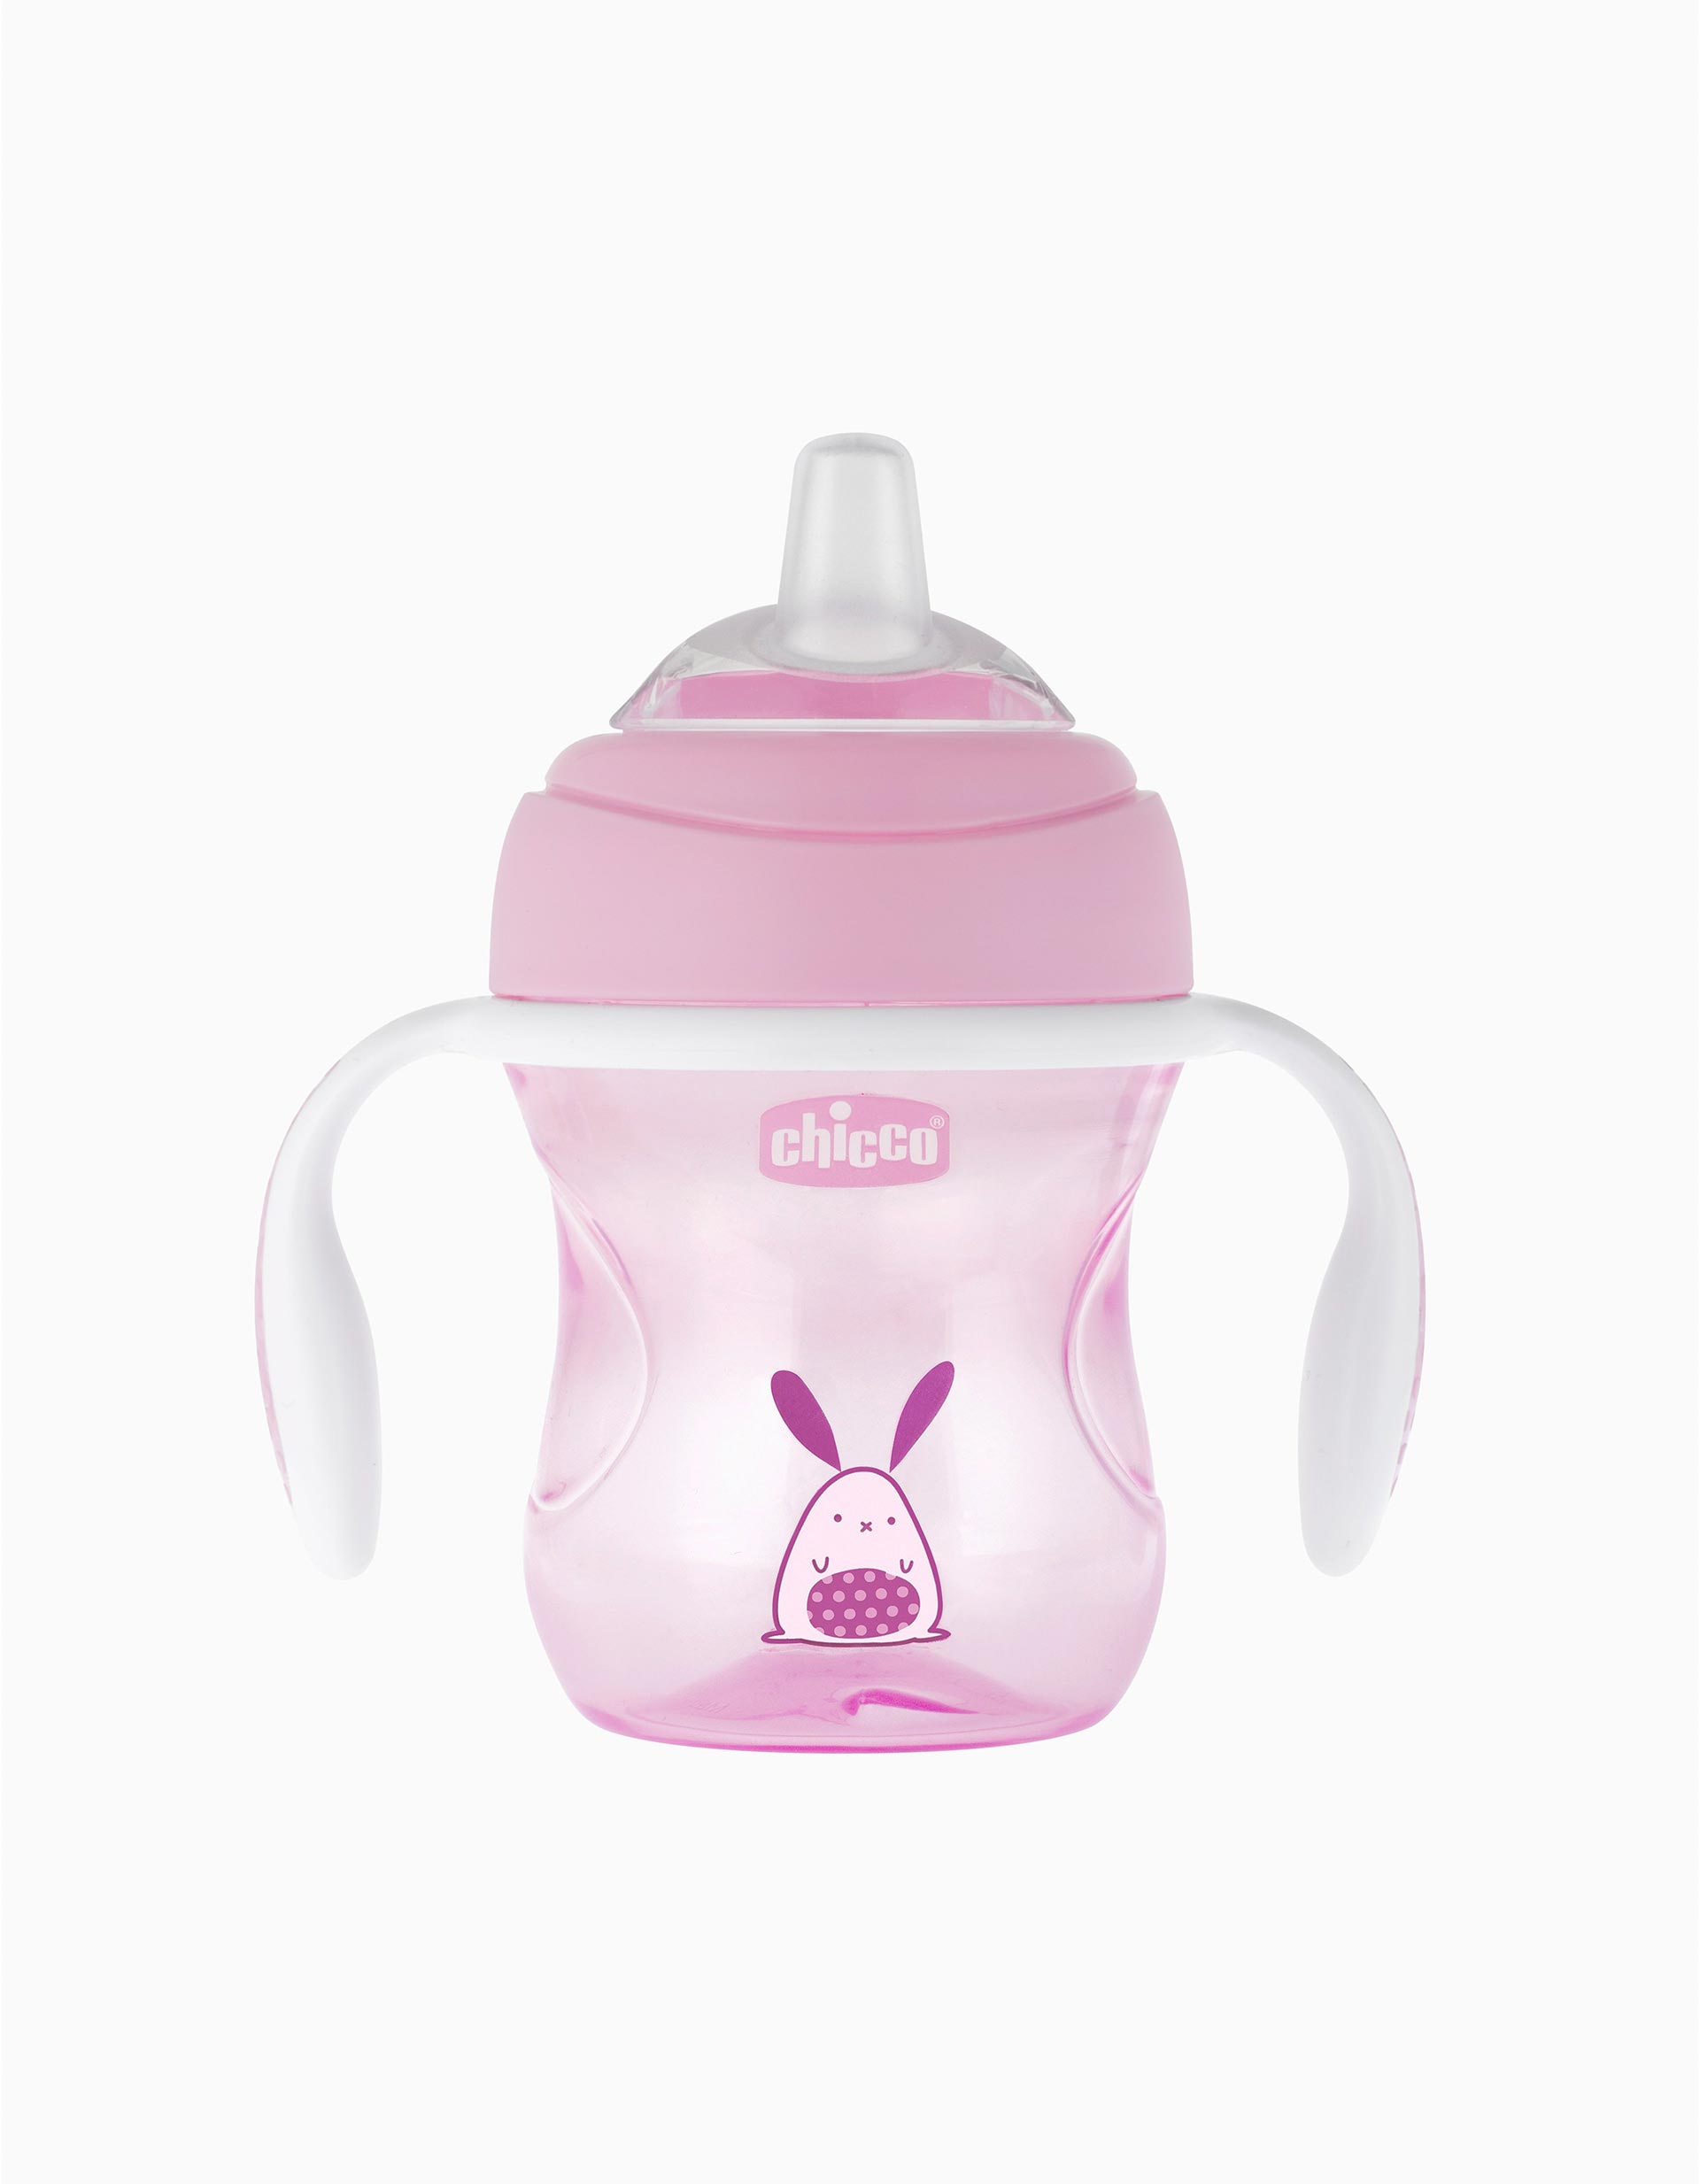 Sippy Cup 4M+ by Chicco